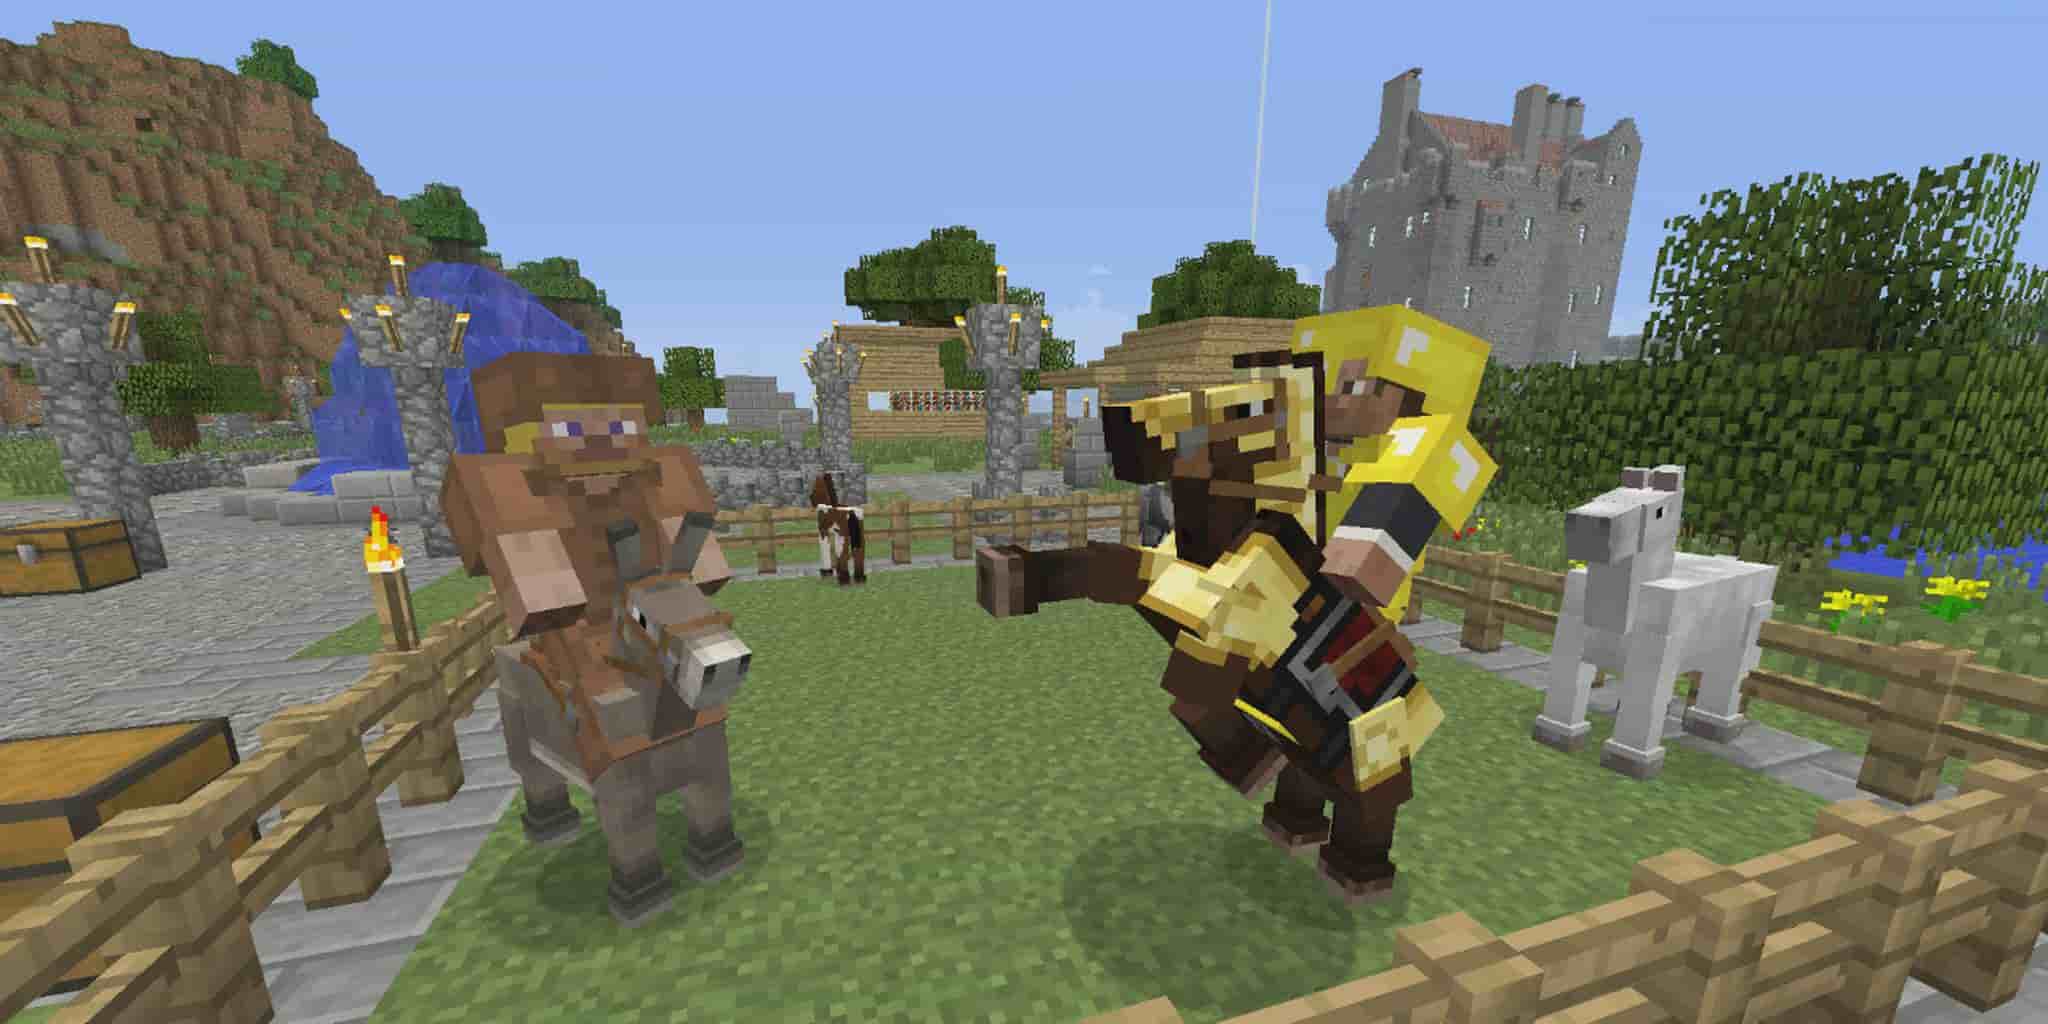 How to Tame a Horse in Minecraft: 4 Simple Steps